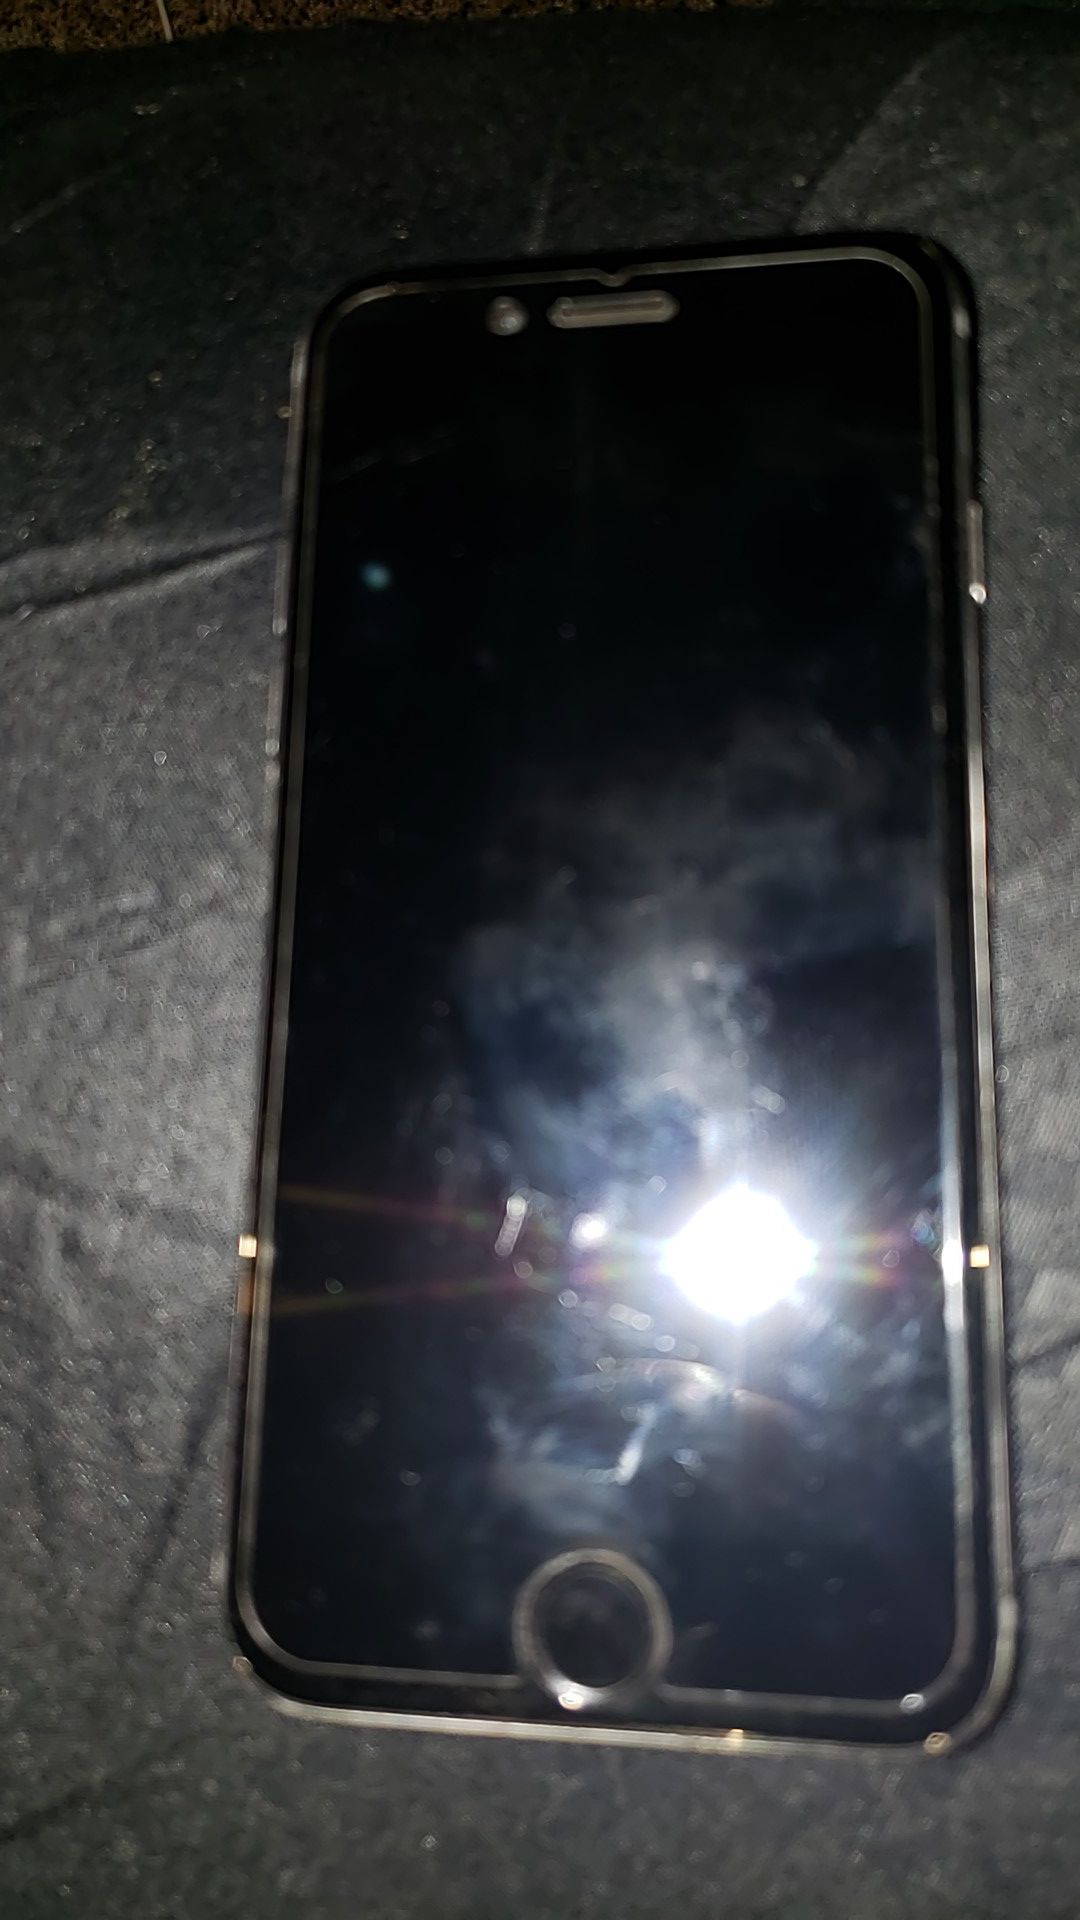 iPhone 6, 16g no cracks phone in perfect condition. All carriers